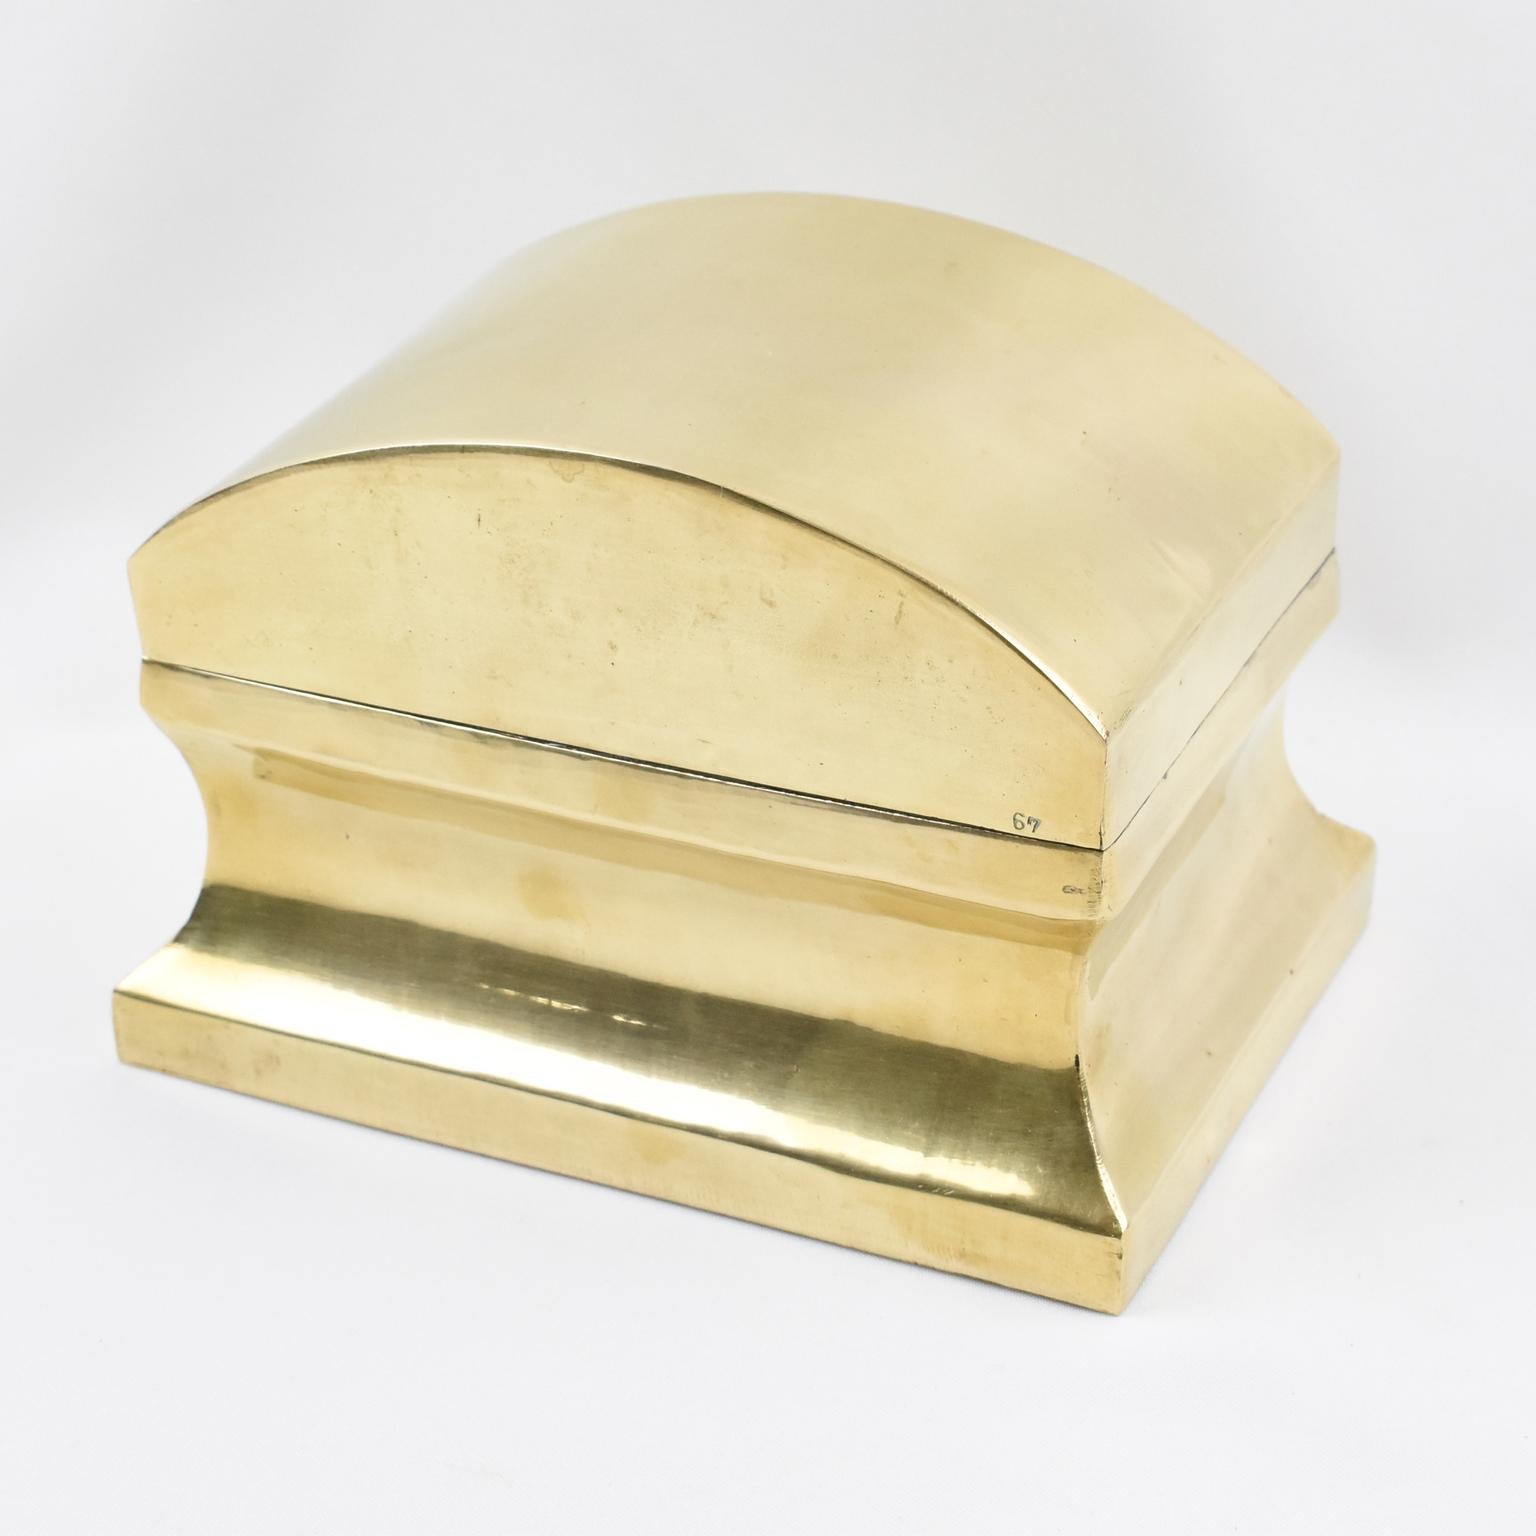 This stylish neoclassical modernist decorative lidded box or tea caddy boasts a rectangular shape with a streamlined design. The piece features polished brass metal with a hinged domed lid shaped like an urn. There is no visible maker's mark, but